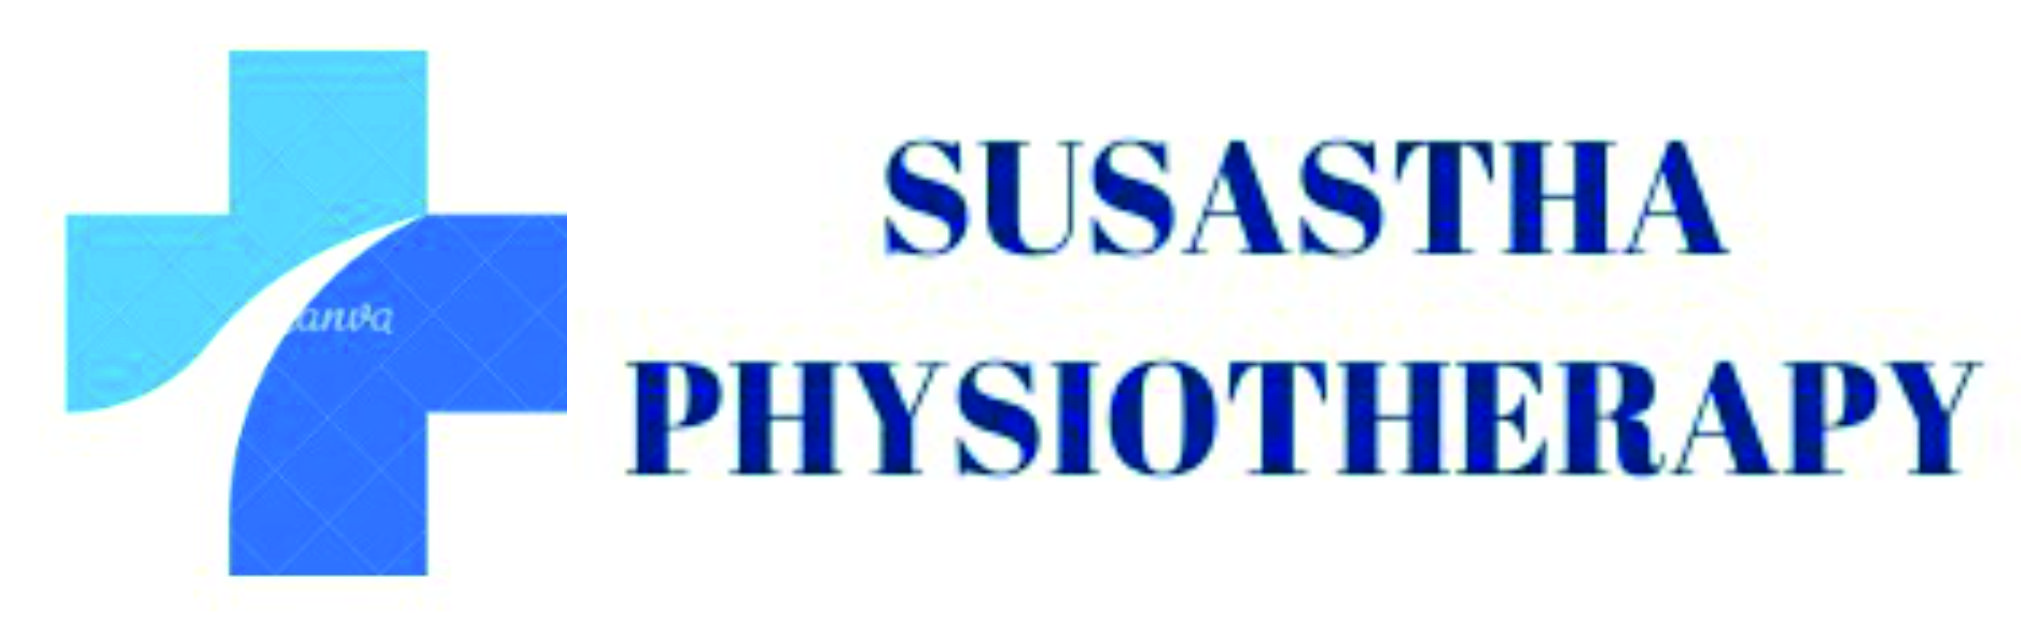 Susastha Physiotherapy